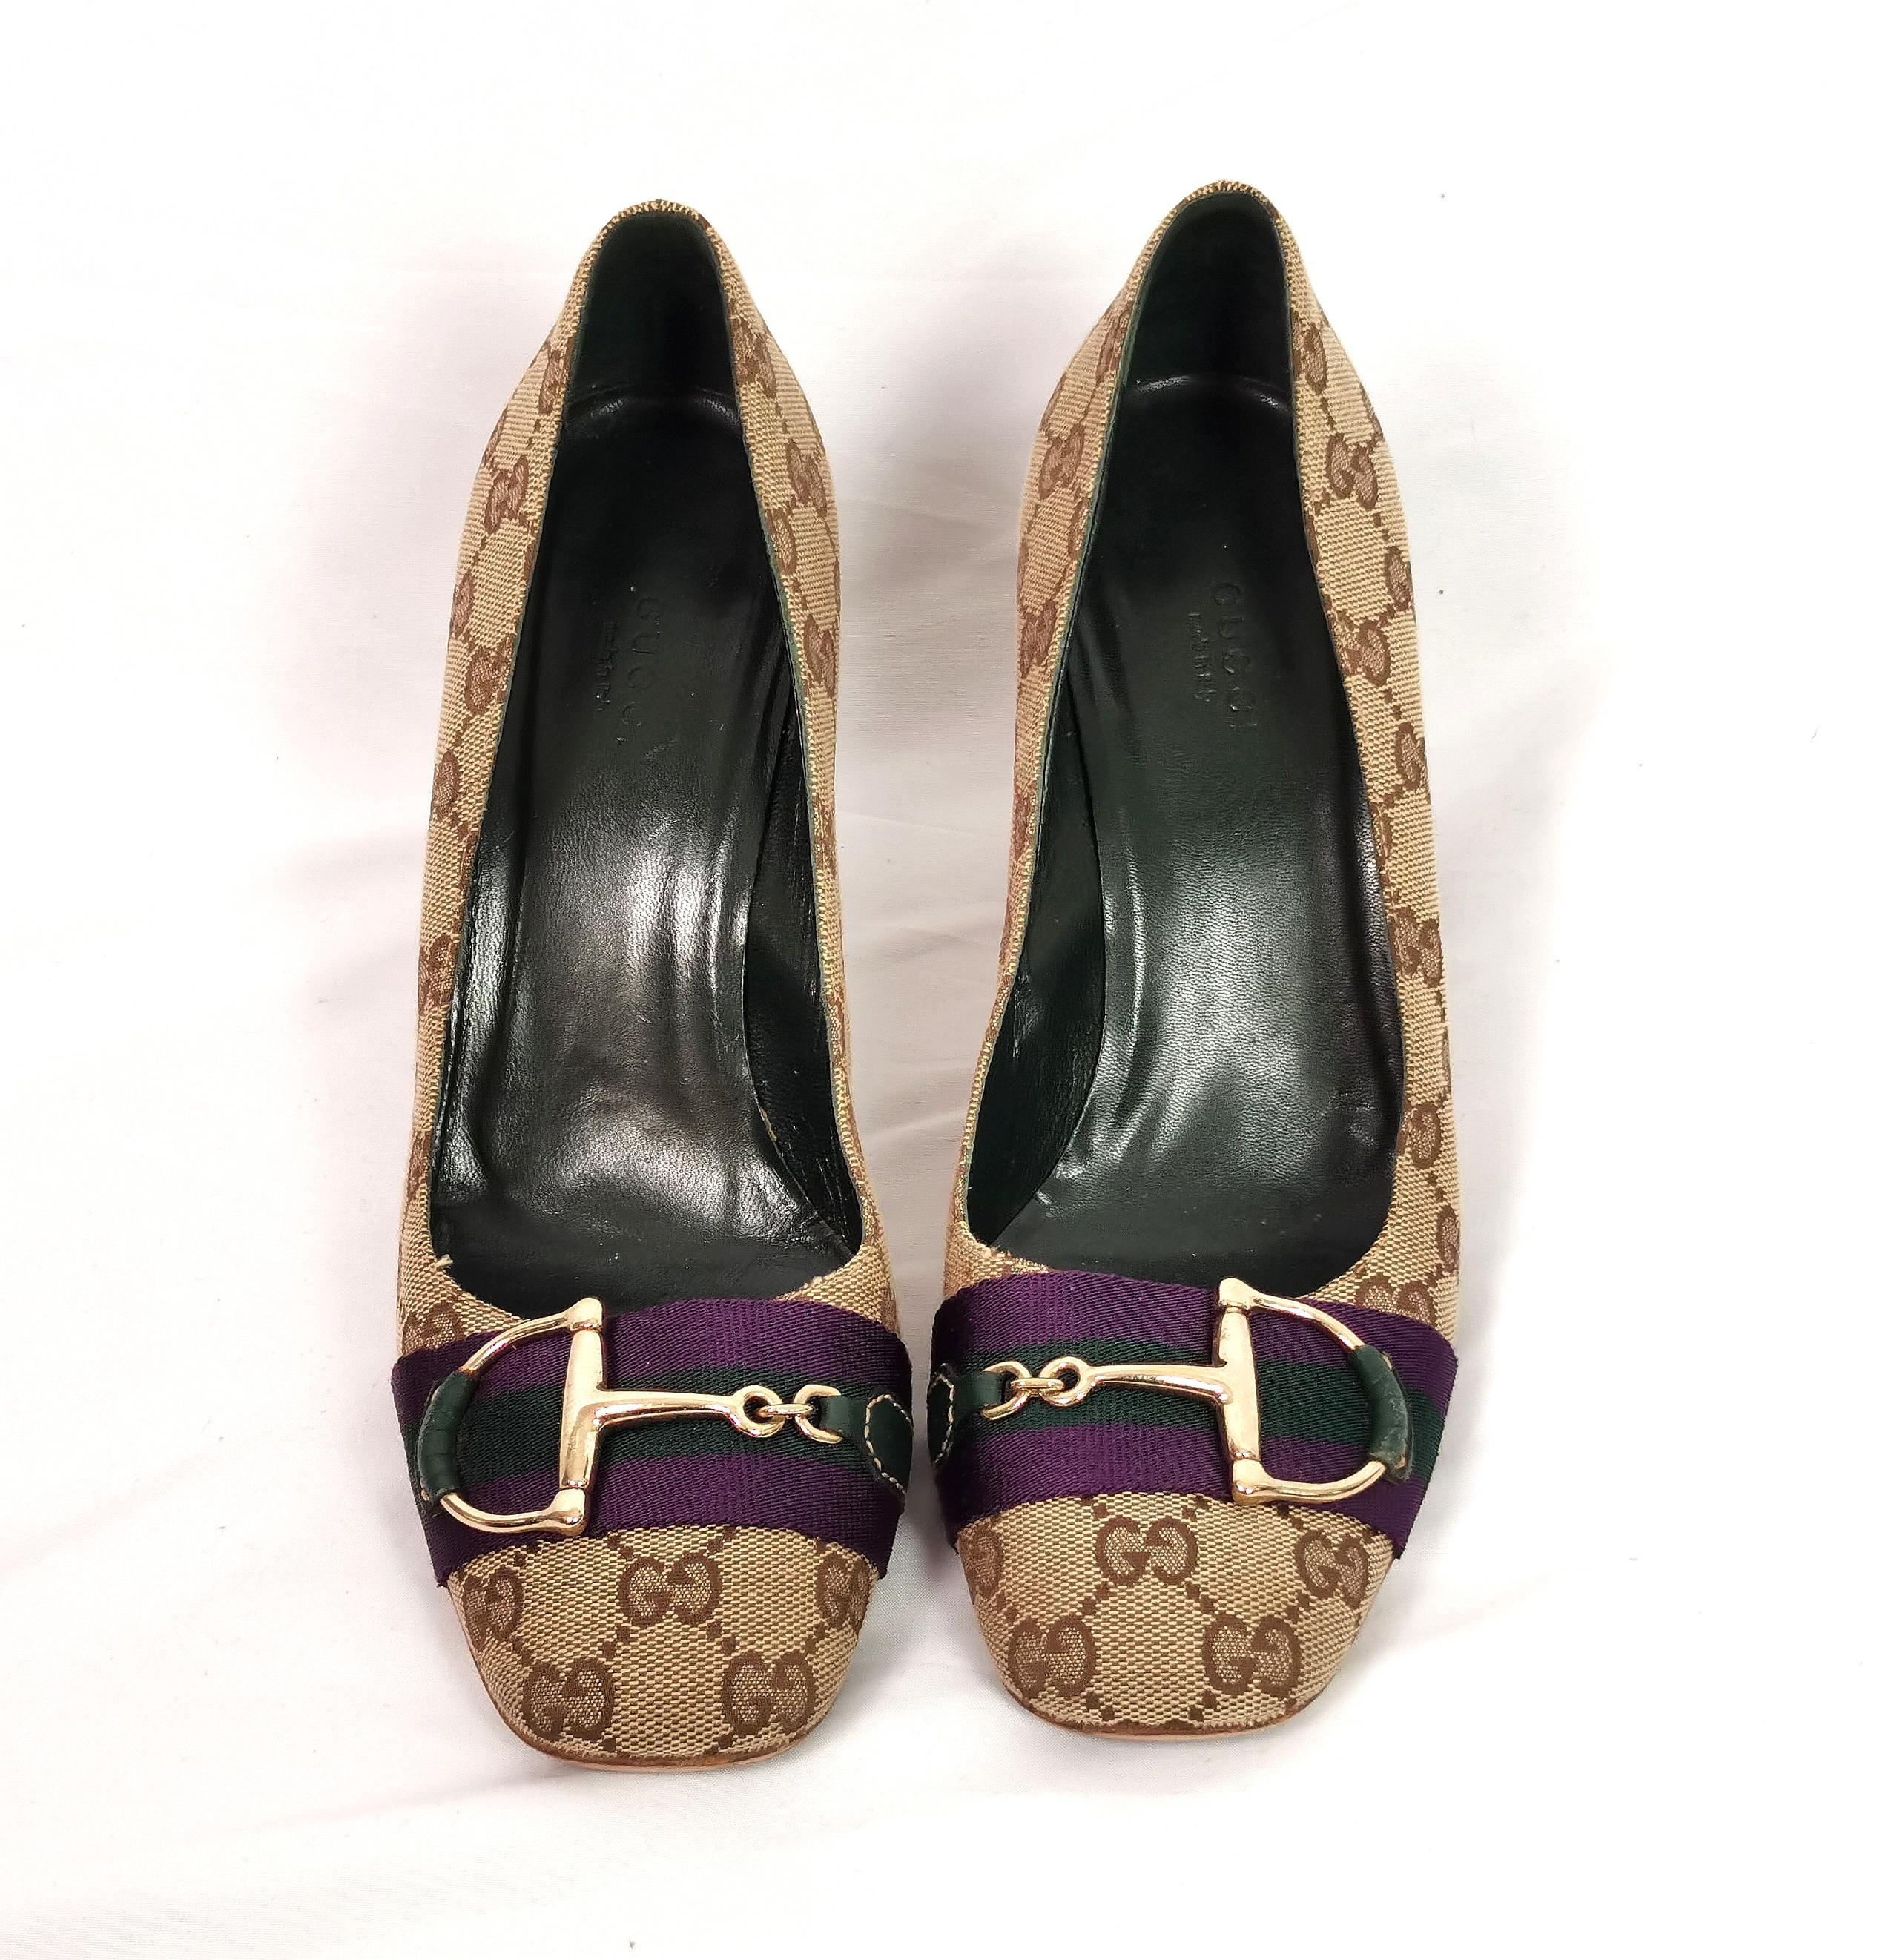 Iconic vintage early 2000s Gucci pumps.

These are signature monogram canvas covered, Heeled pumps with a gorgeous stacked heel and a gold tone horsebit embellishment to the toe.

The horsebit design is laid on a dark purple and green grosgrain